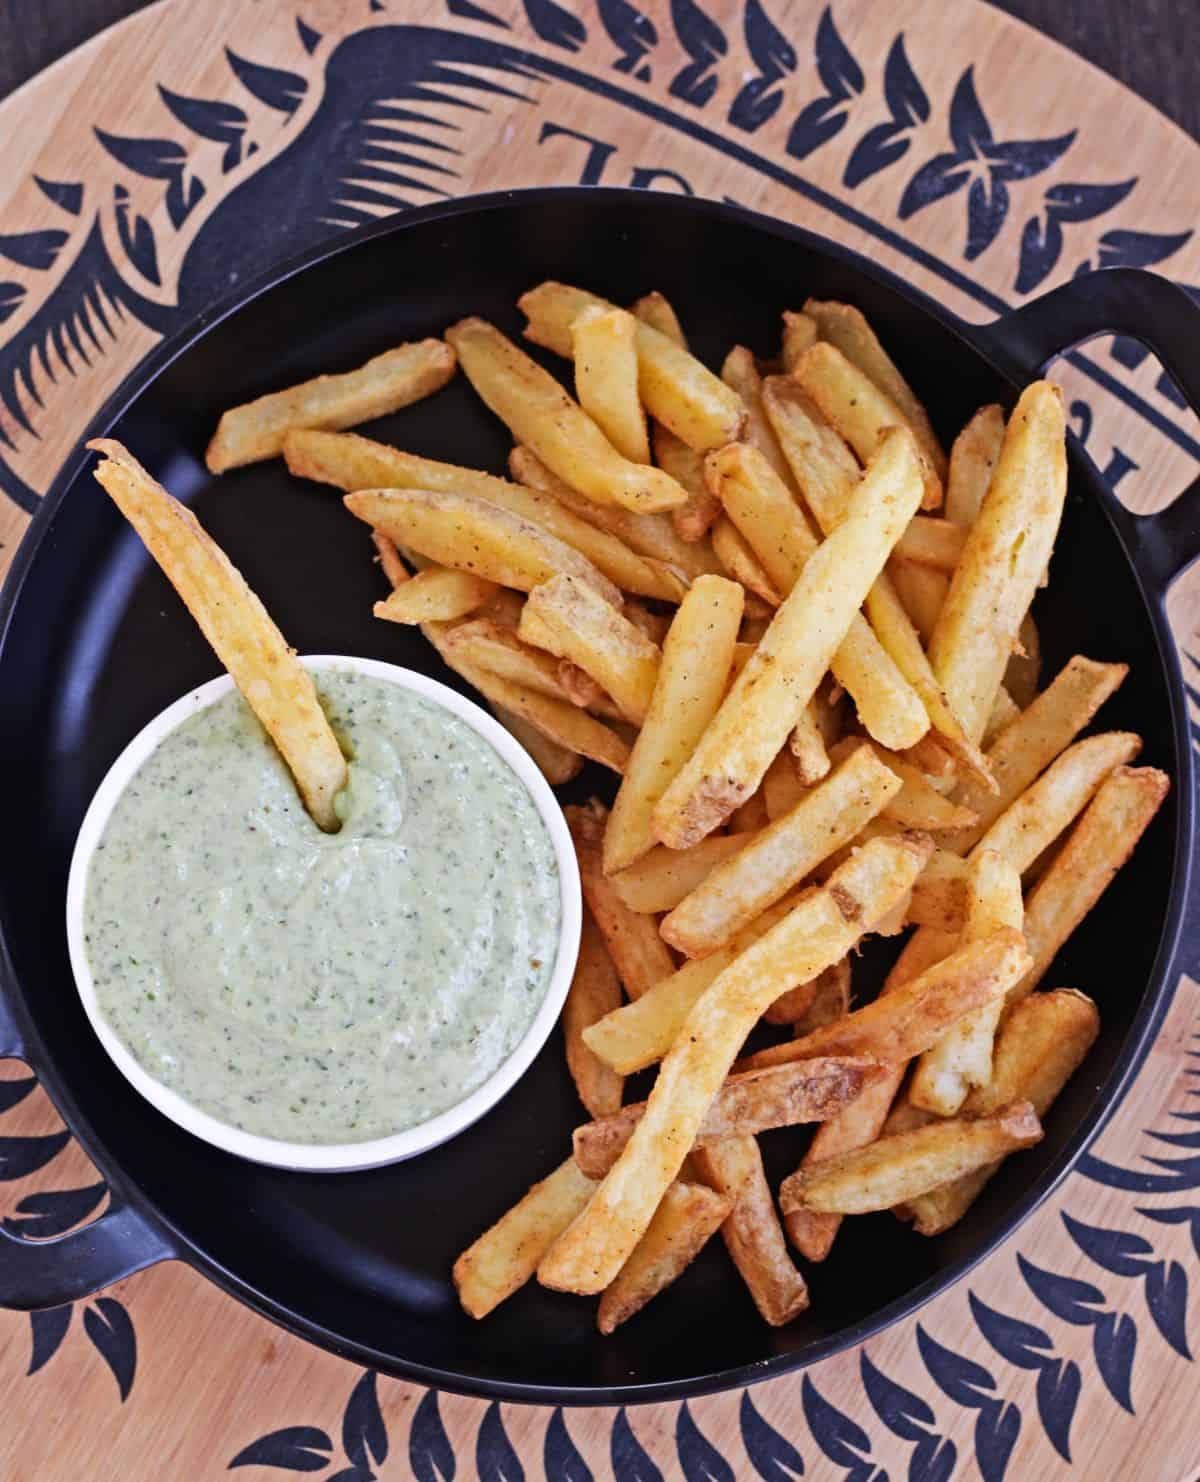 Basil pesto mayo with fries in a black plate